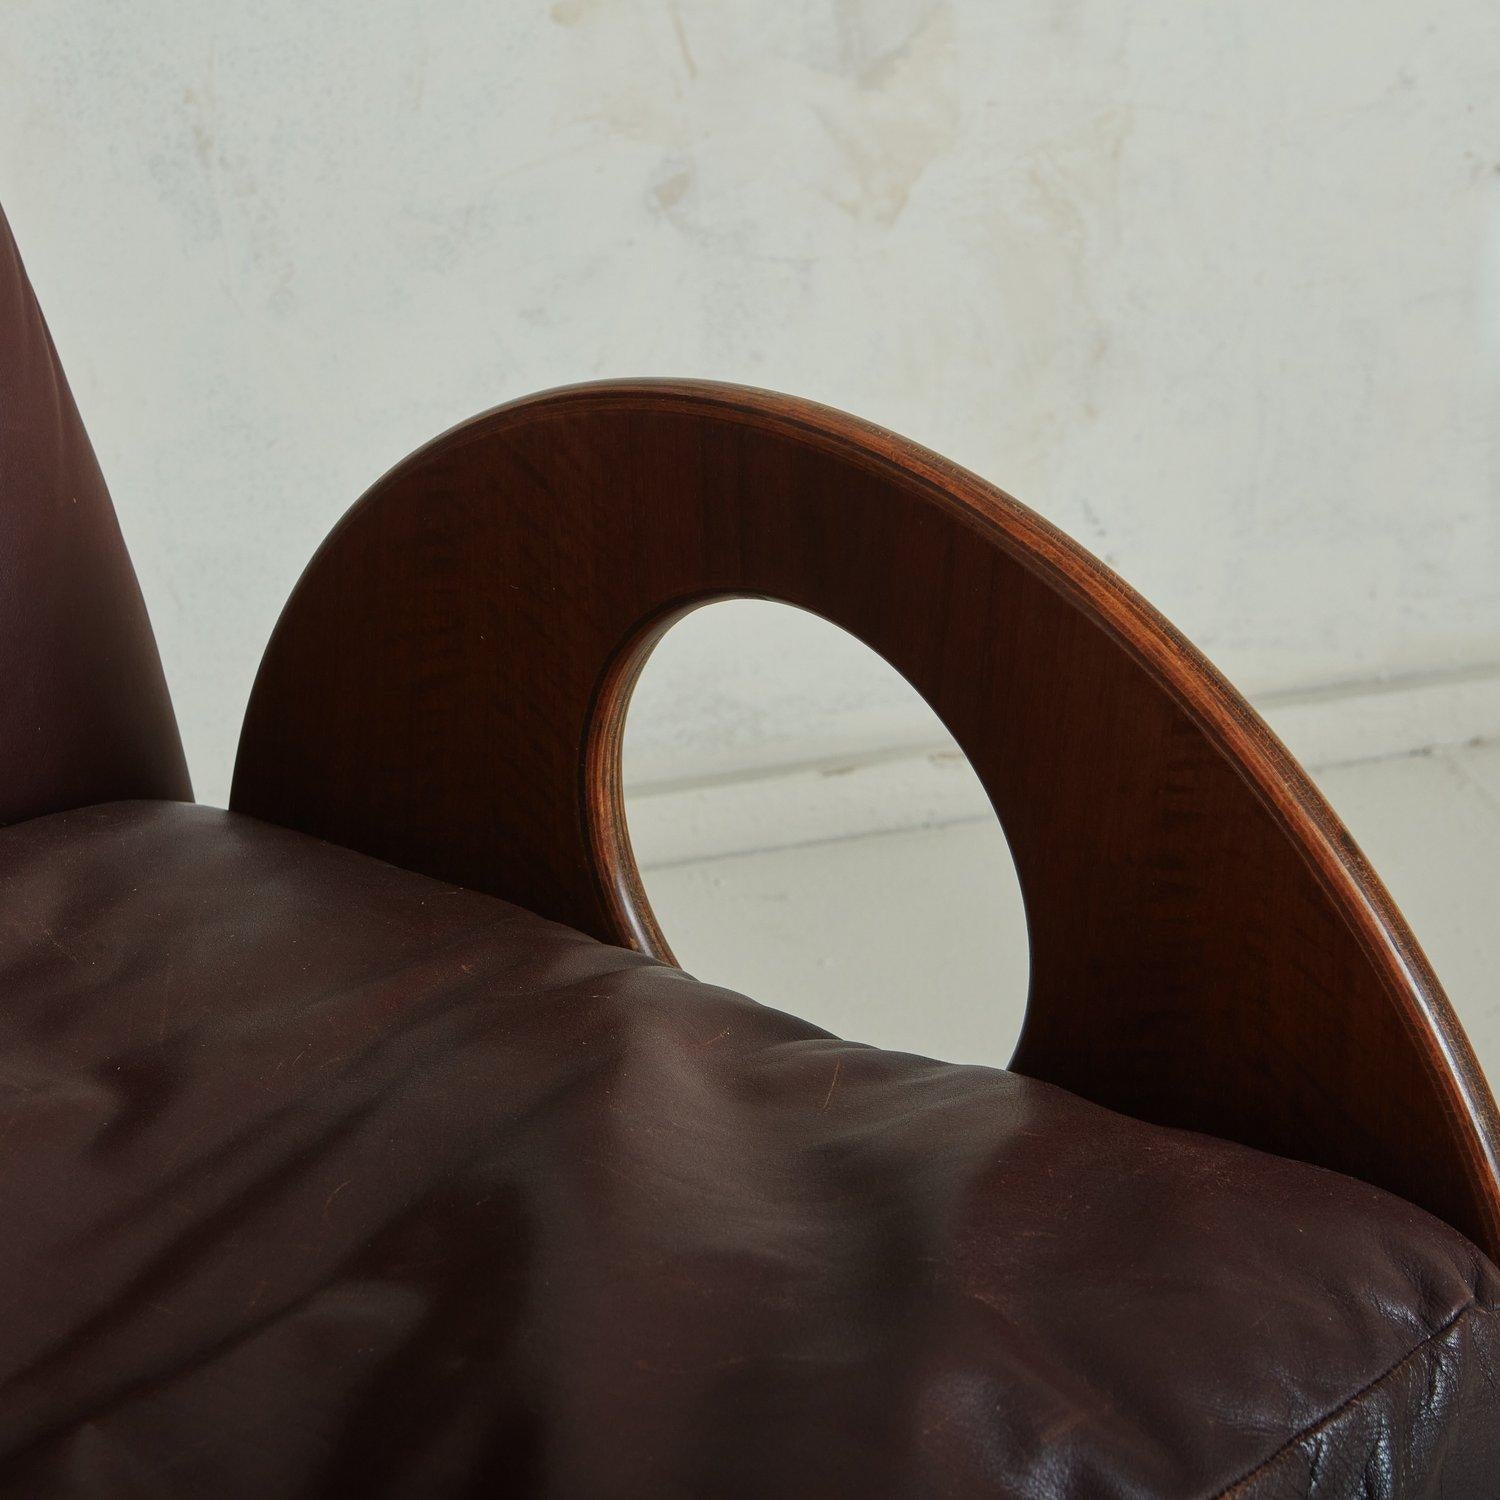 Walnut + Leather 'Arcata' Chair by Gae Aulenti for Poltronova, Italy 1968 For Sale 7